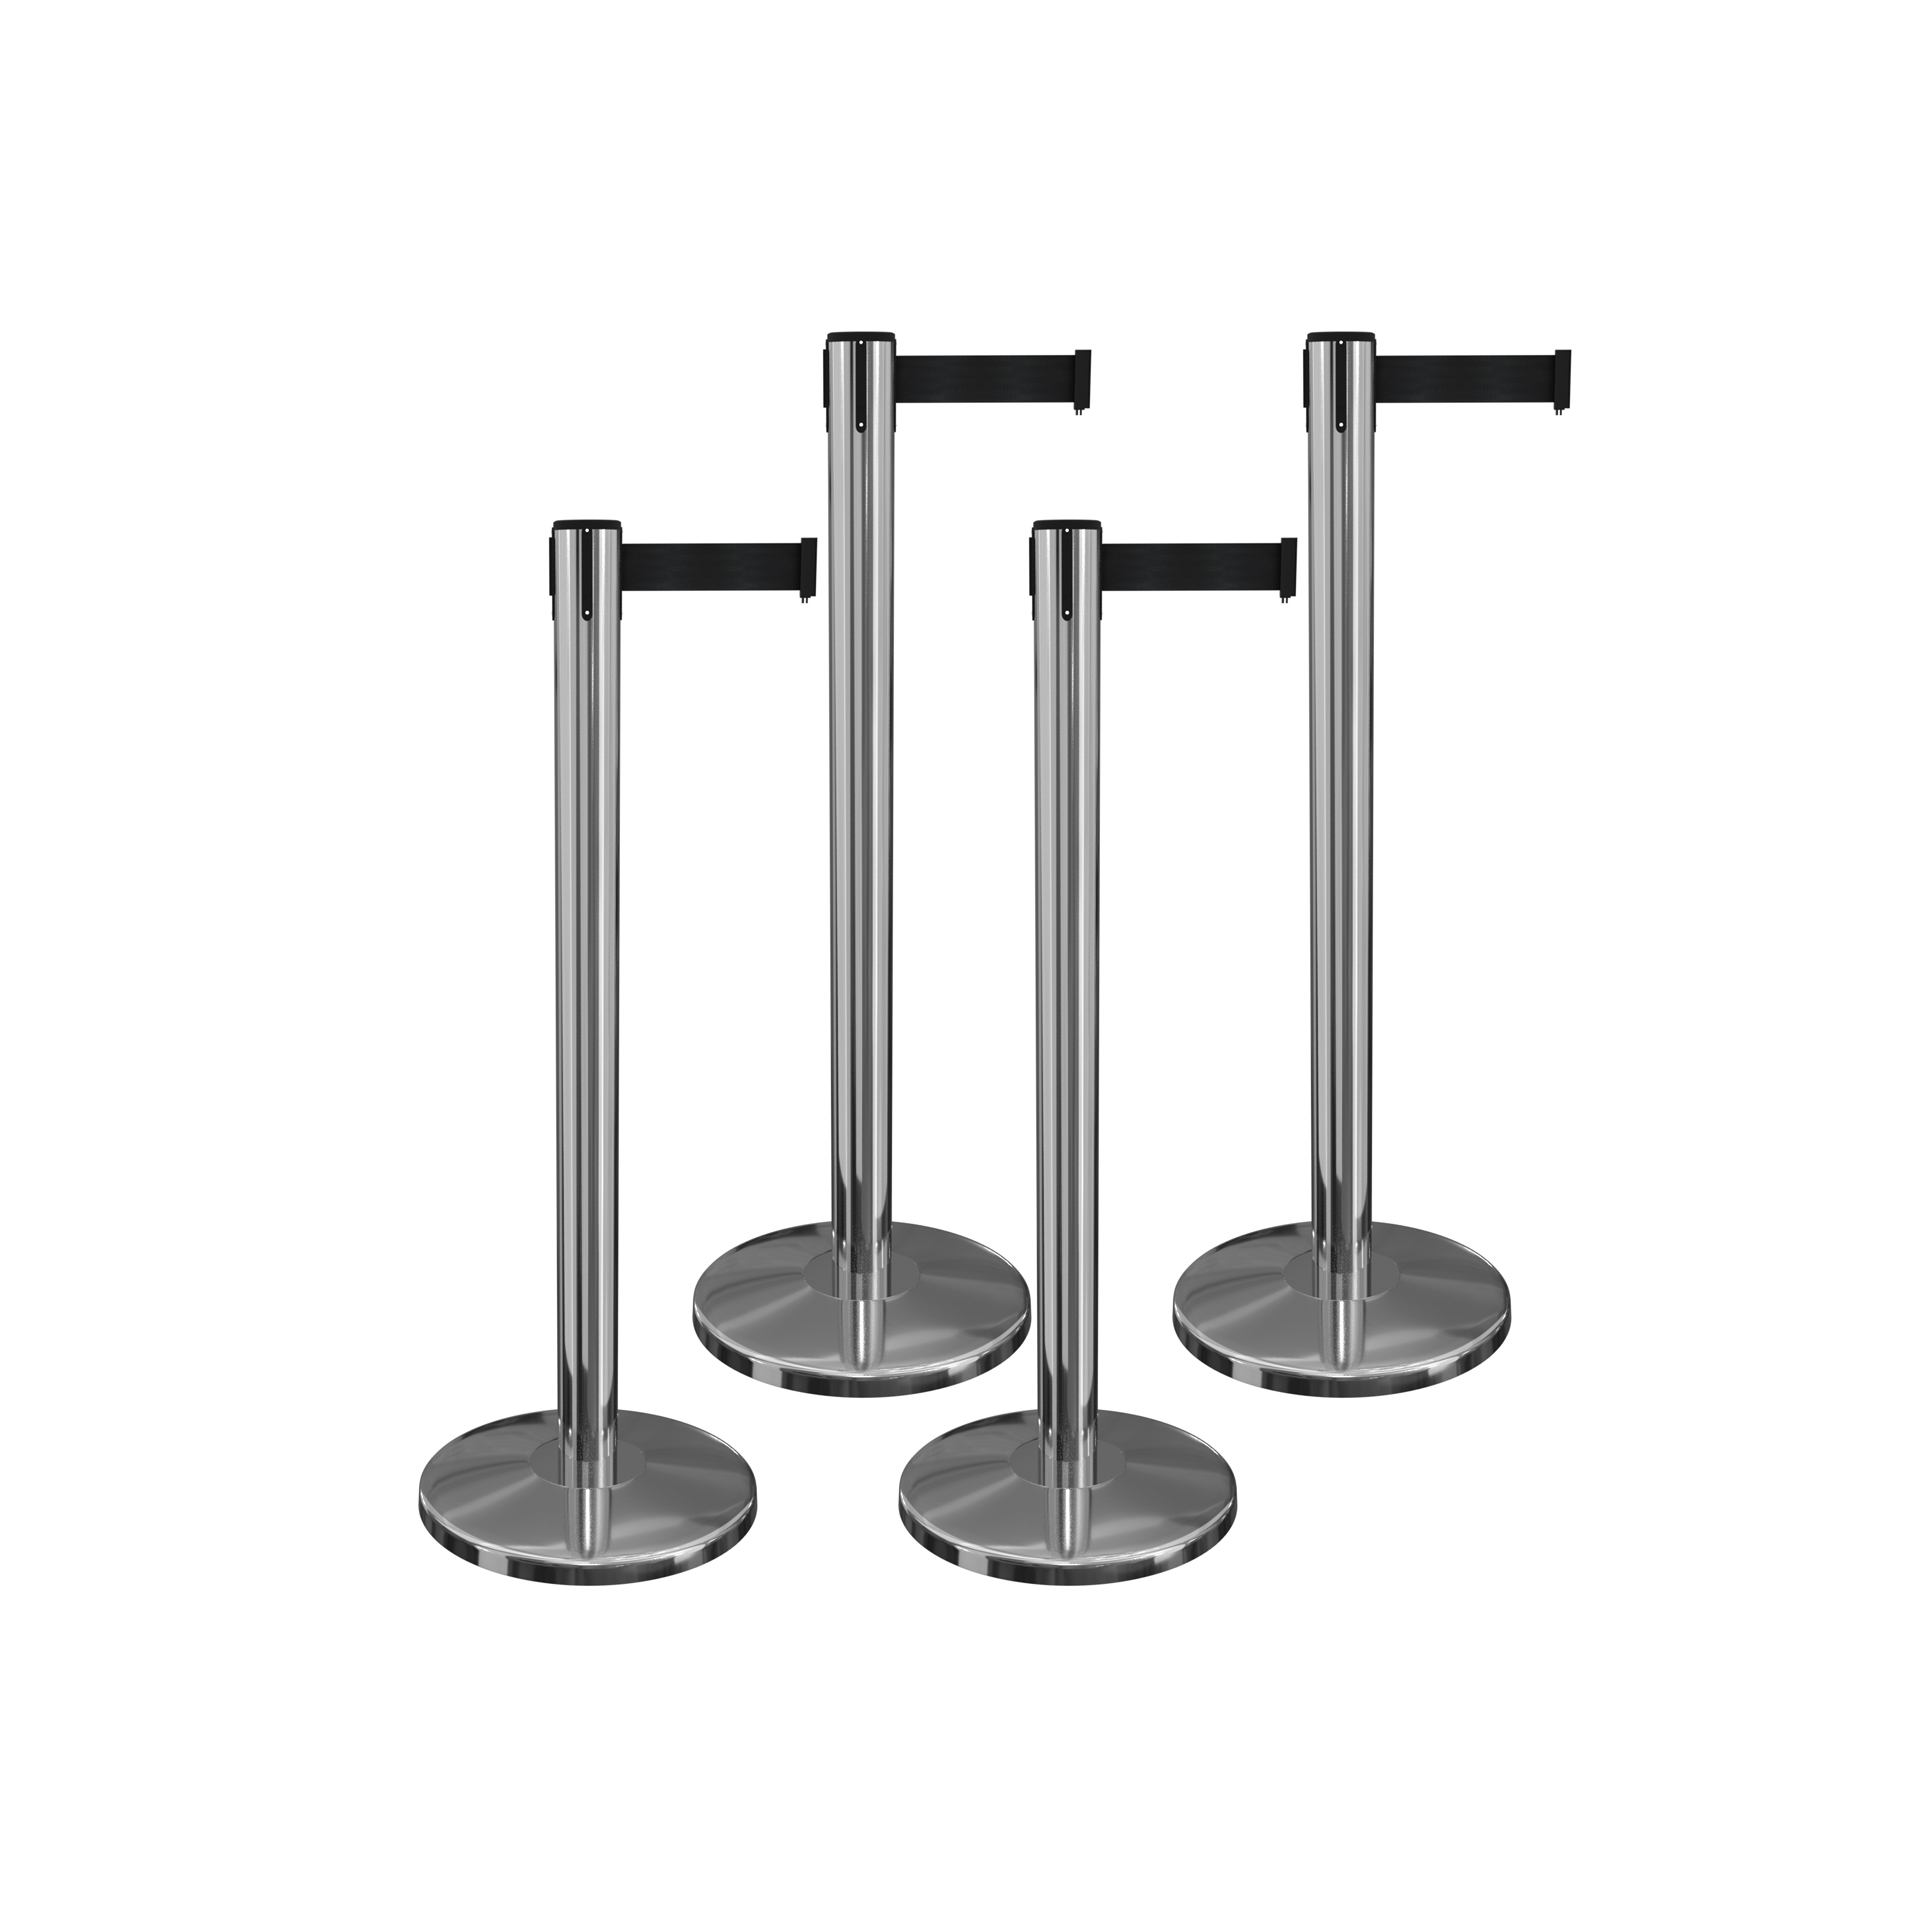 Pack of 4 Polished Stainless Retractable Belt Barriers